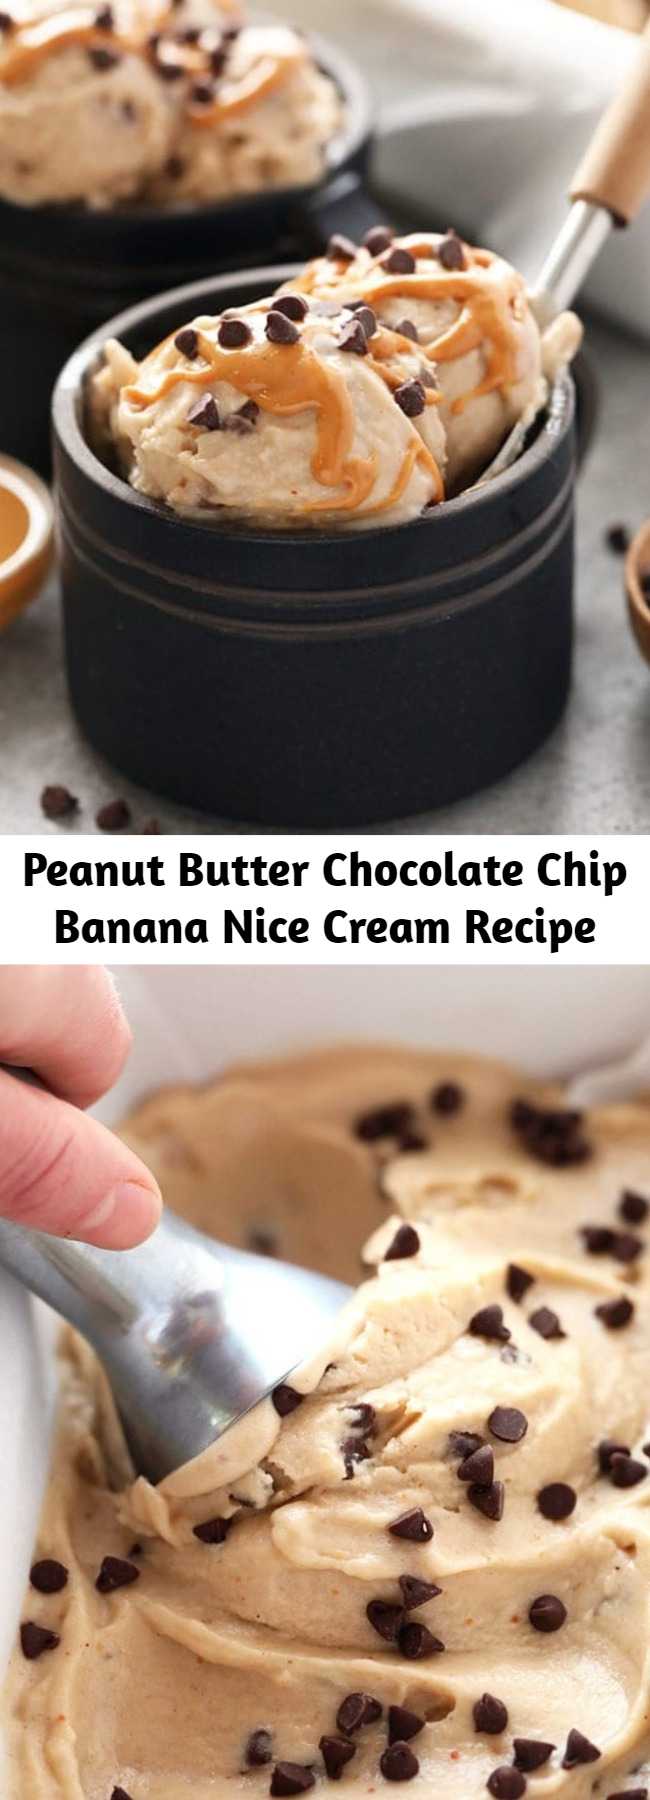 Peanut Butter Chocolate Chip Banana Nice Cream Recipe - This Peanut Butter Banana Nice Cream recipe will make your dessert dreams come true! With only 4 ingredients, this nice cream is dairy-free, vegan and ready in under 10 minutes flat. Top with chocolate chips and serve immediately or freeze for later! #kidfriendly #dessert #healthydessert #glutenfree